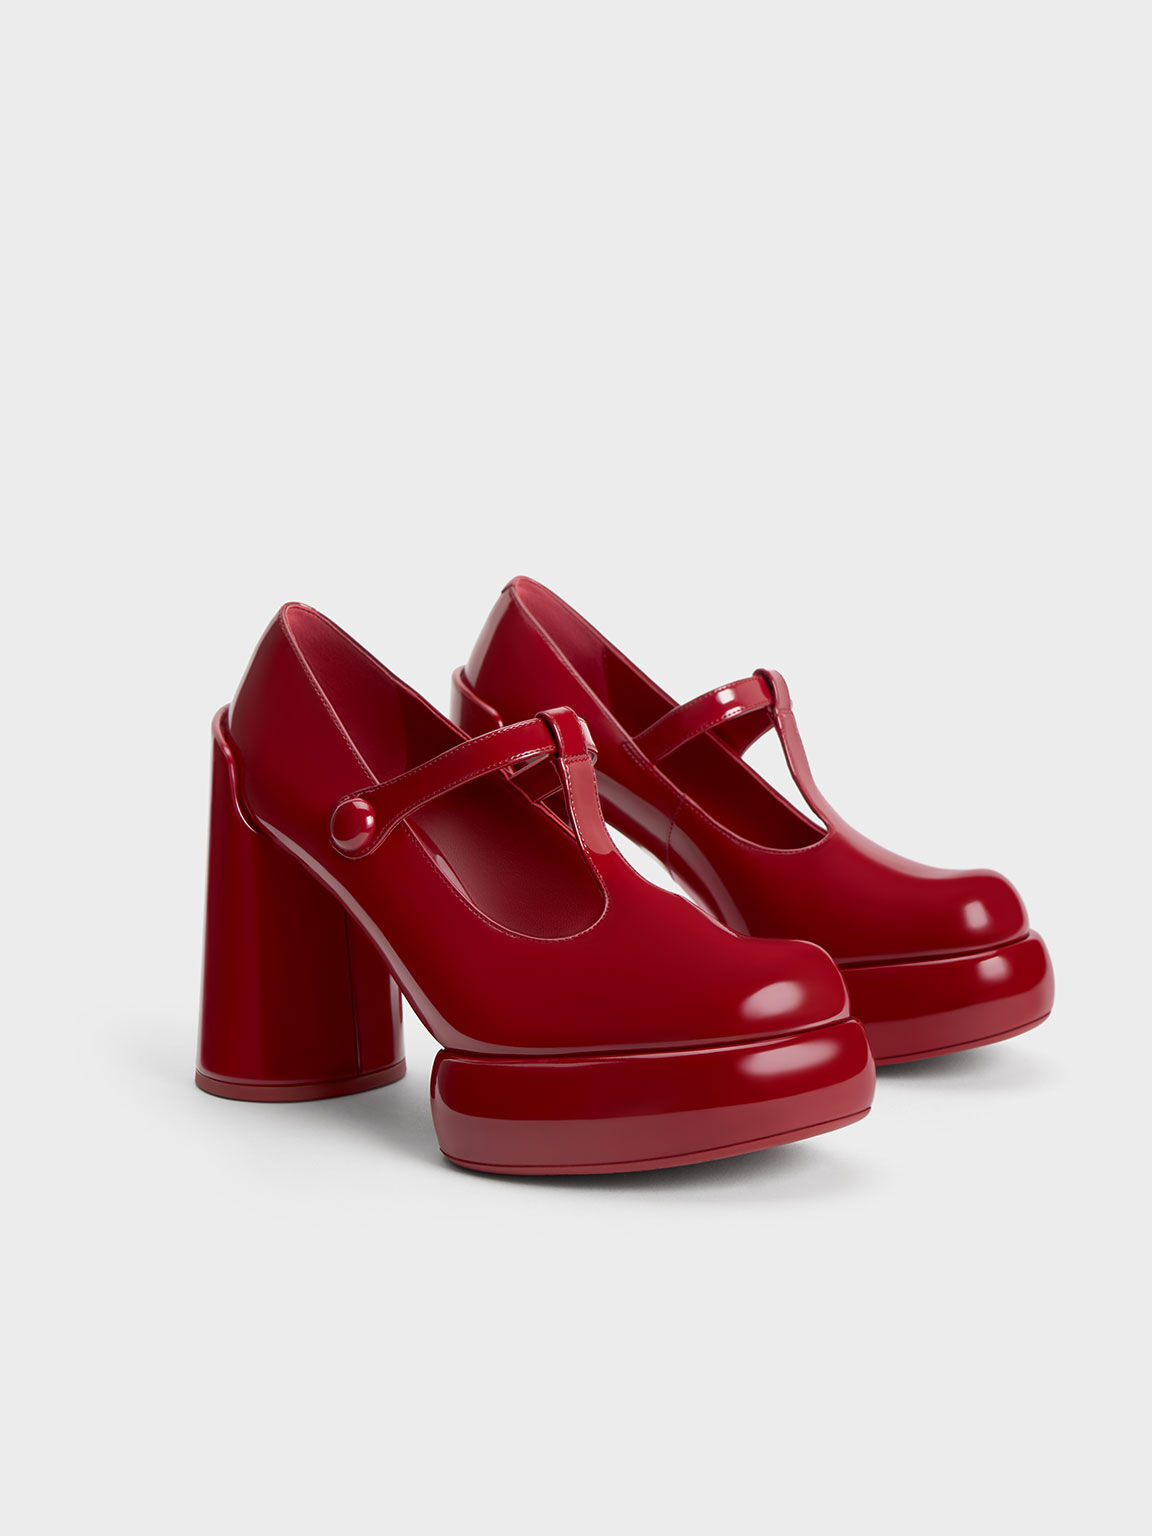 Darcy Patent T-Bar Platform Mary Janes - Red